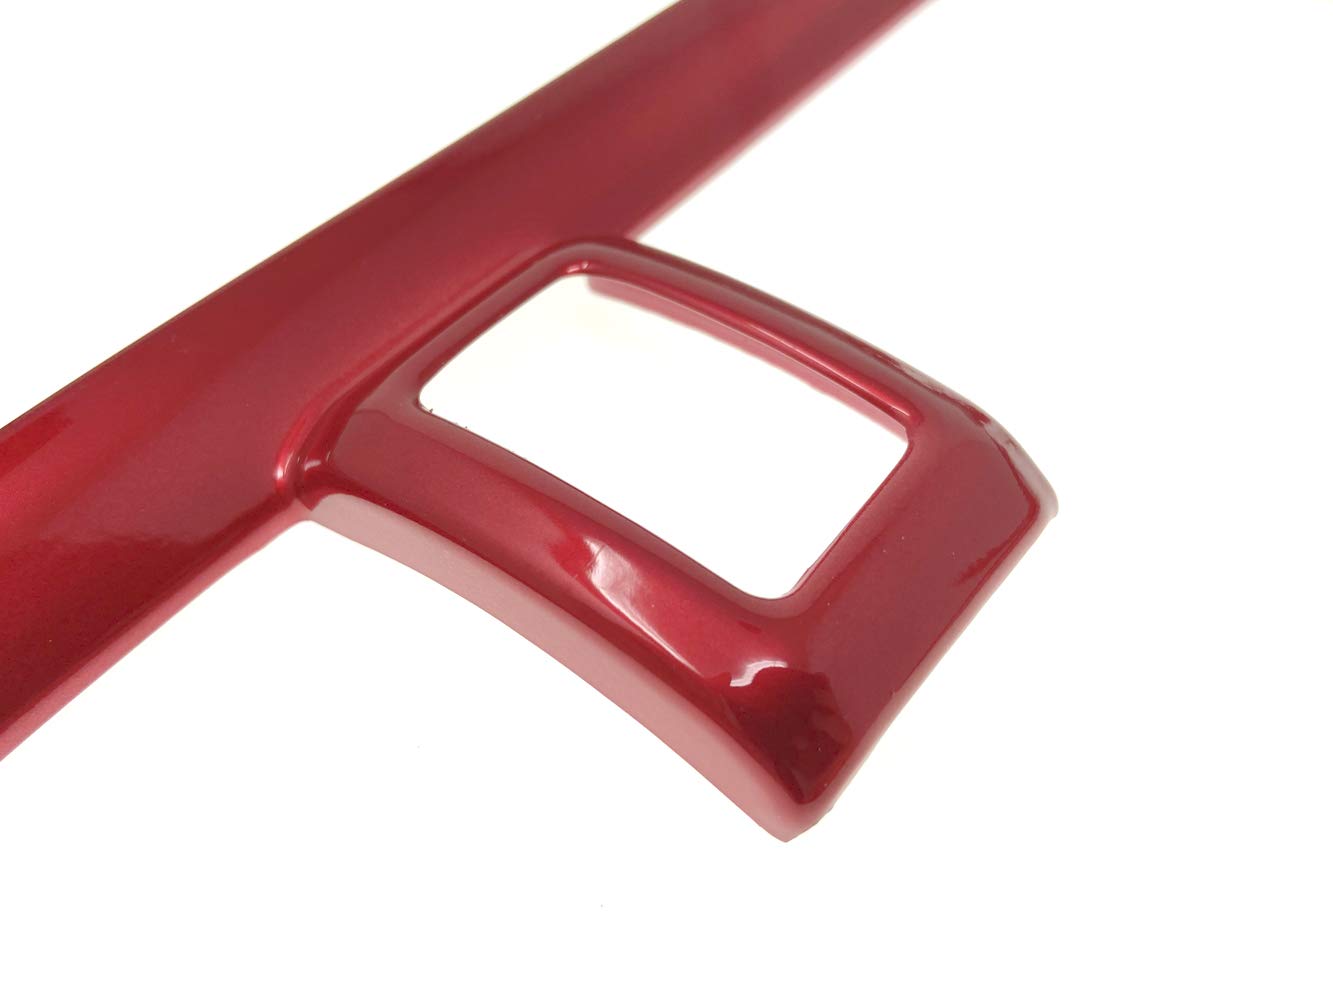 GZXinWei Red Dashboard Air Vent Outlet Cover Trim Interior Frame Panel Sticker for Honda 10th Gen Civic 2016 2017 2018 2019 2020 2021